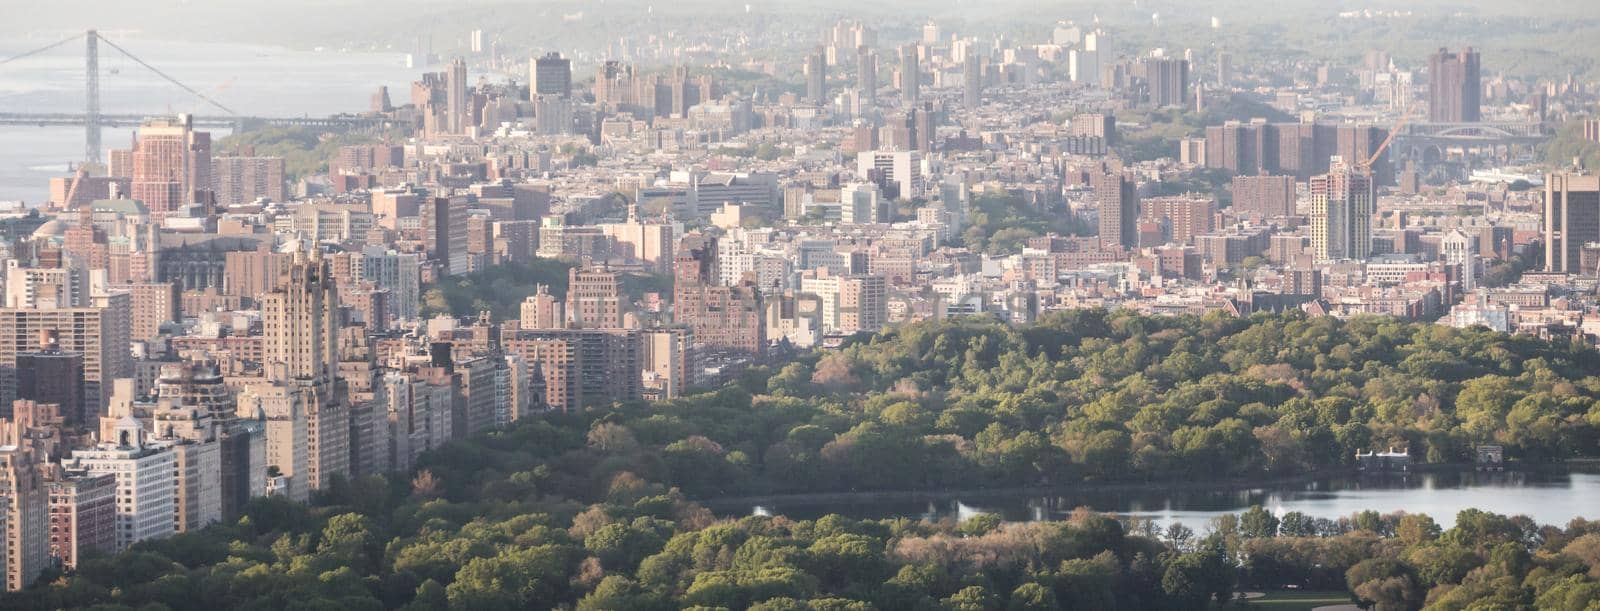 New york, USA - May 17, 2019: Central Park aerial view, Manhattan, New York. Park is surrounded by tall skyscrapers